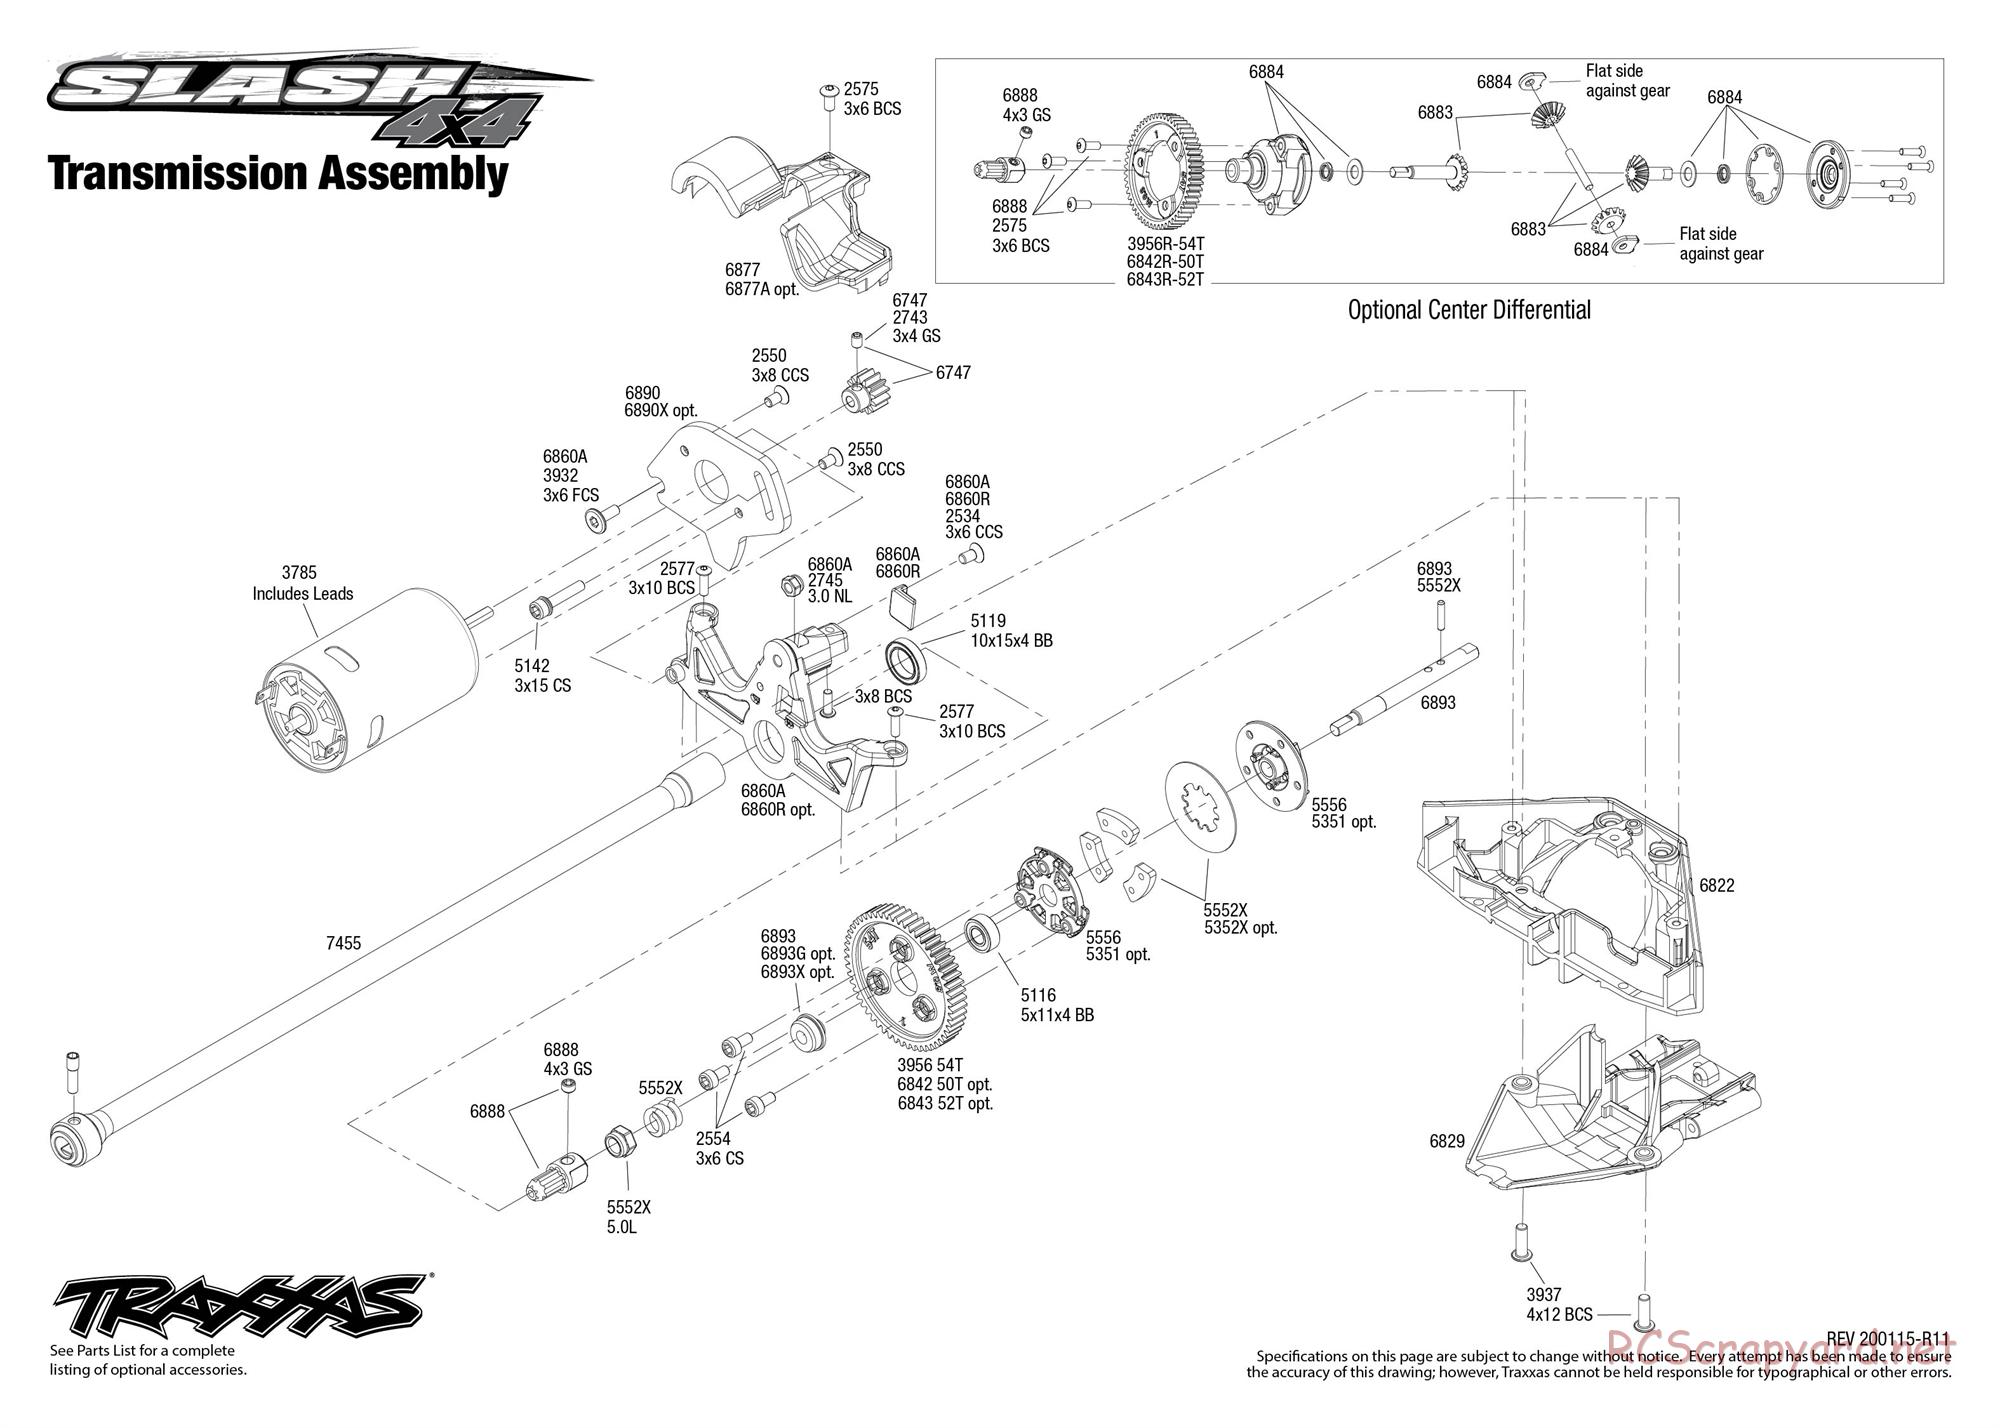 Traxxas - Slash 4x4 Brushed (2018) - Exploded Views - Page 6